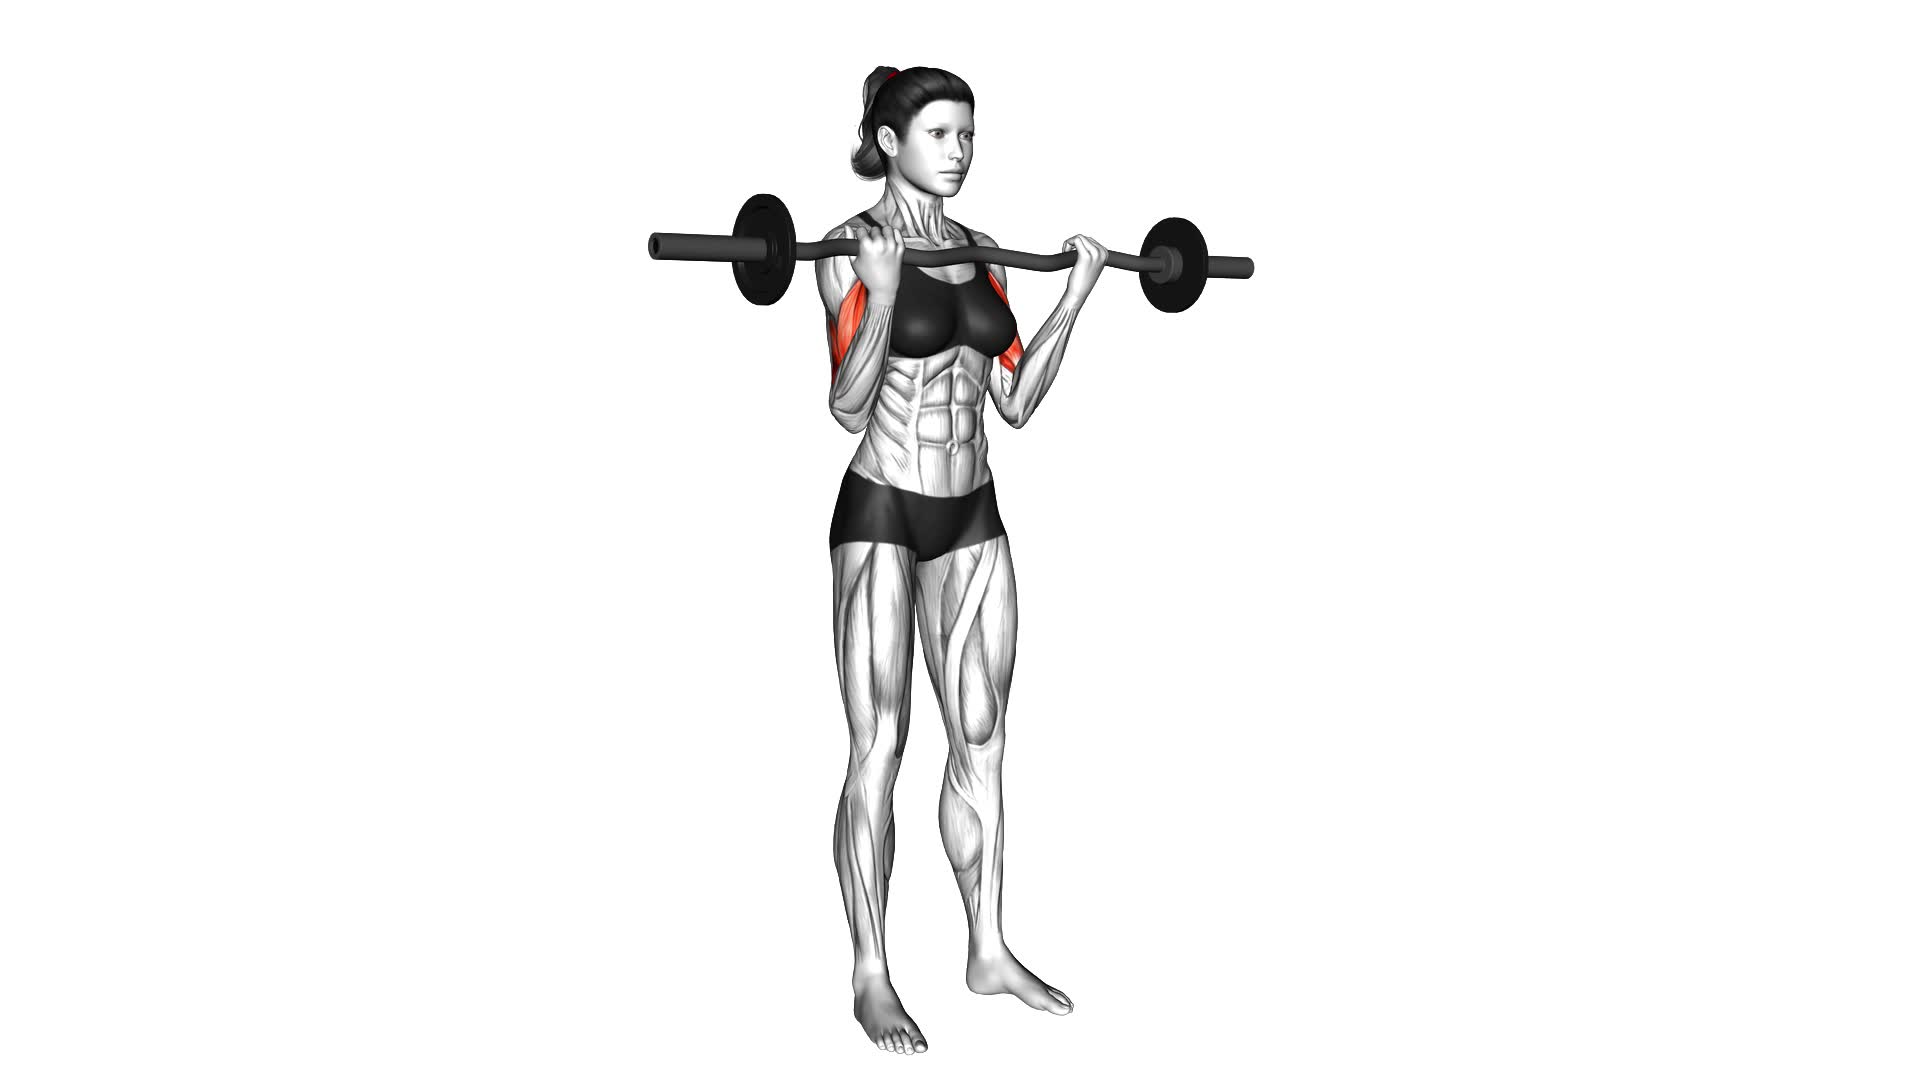 EZ Barbell Curl (female) - Video Exercise Guide & Tips